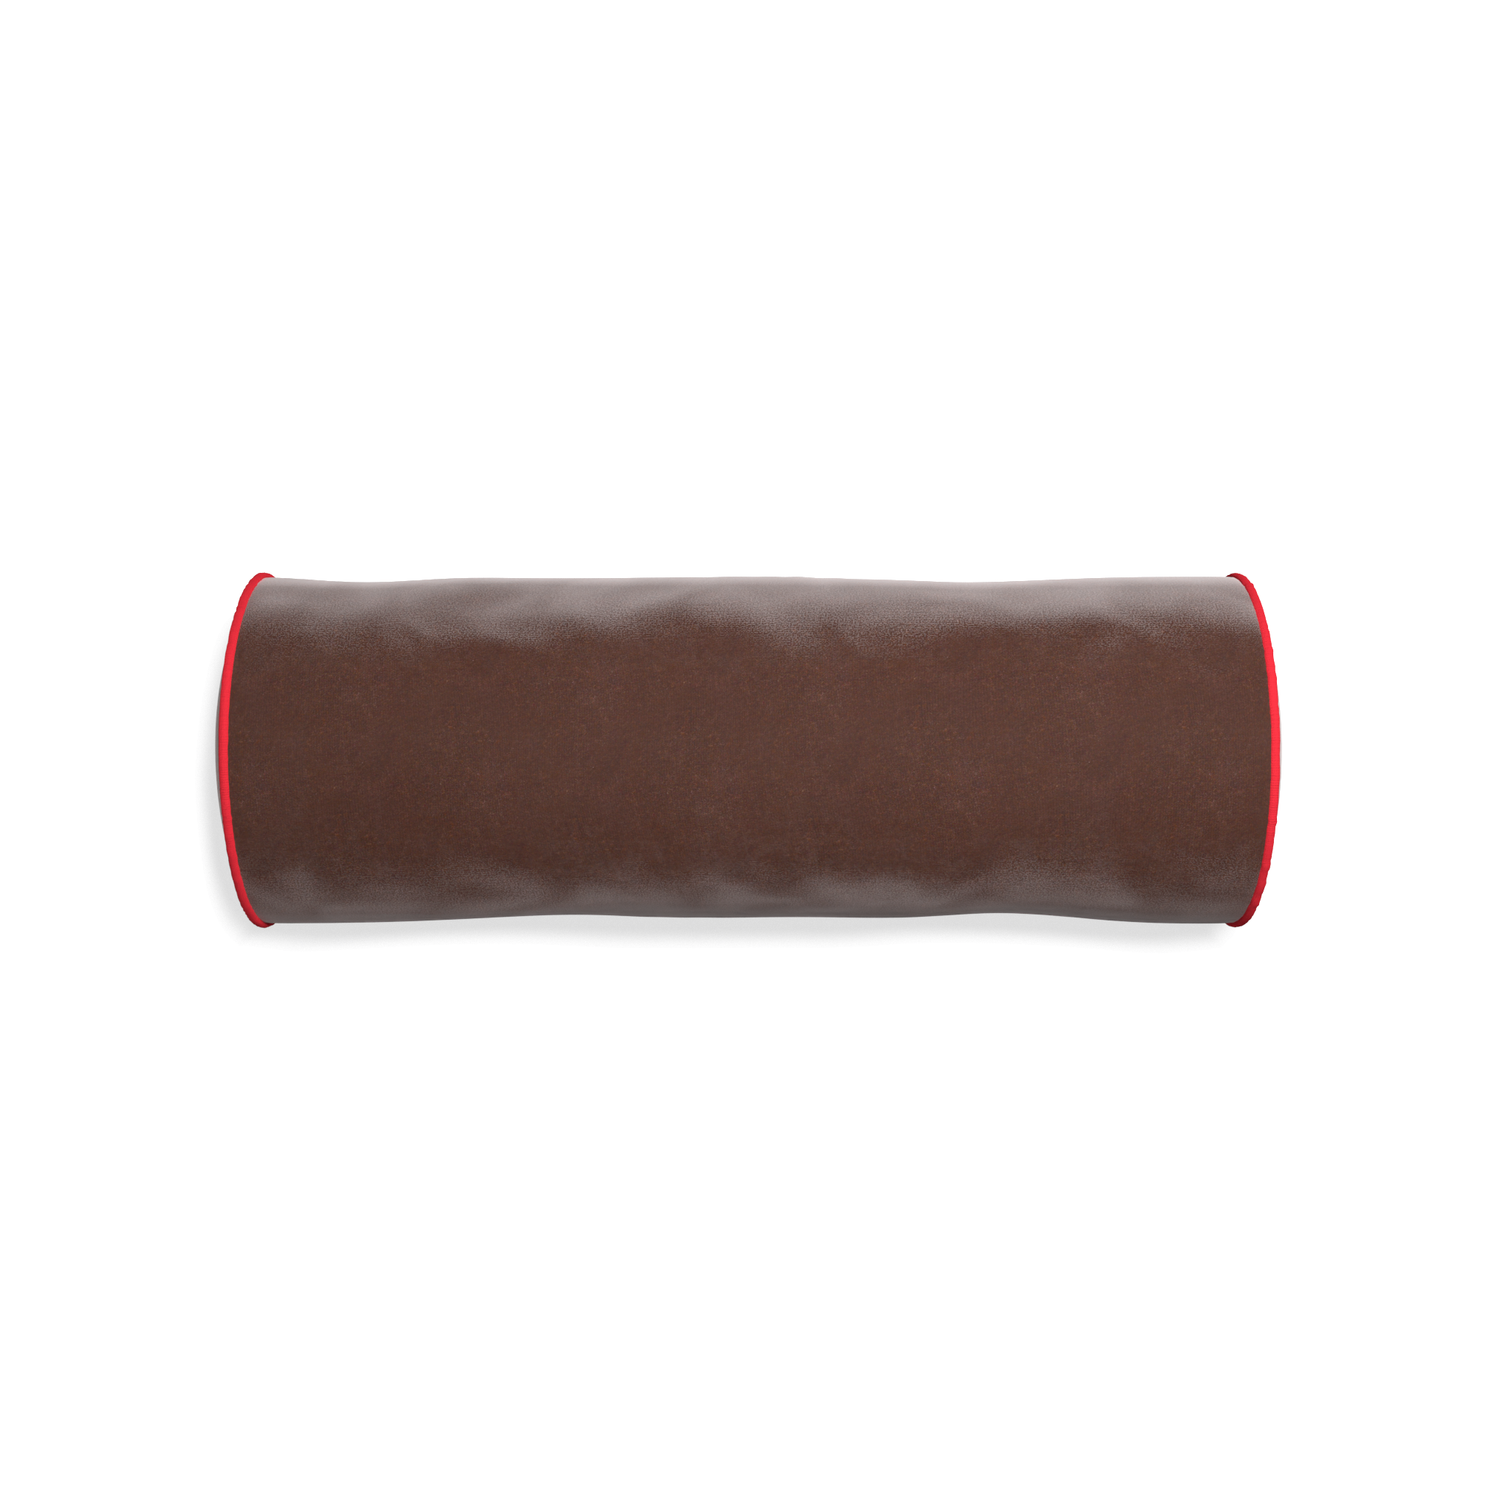 bolster brown velvet pillow with red piping